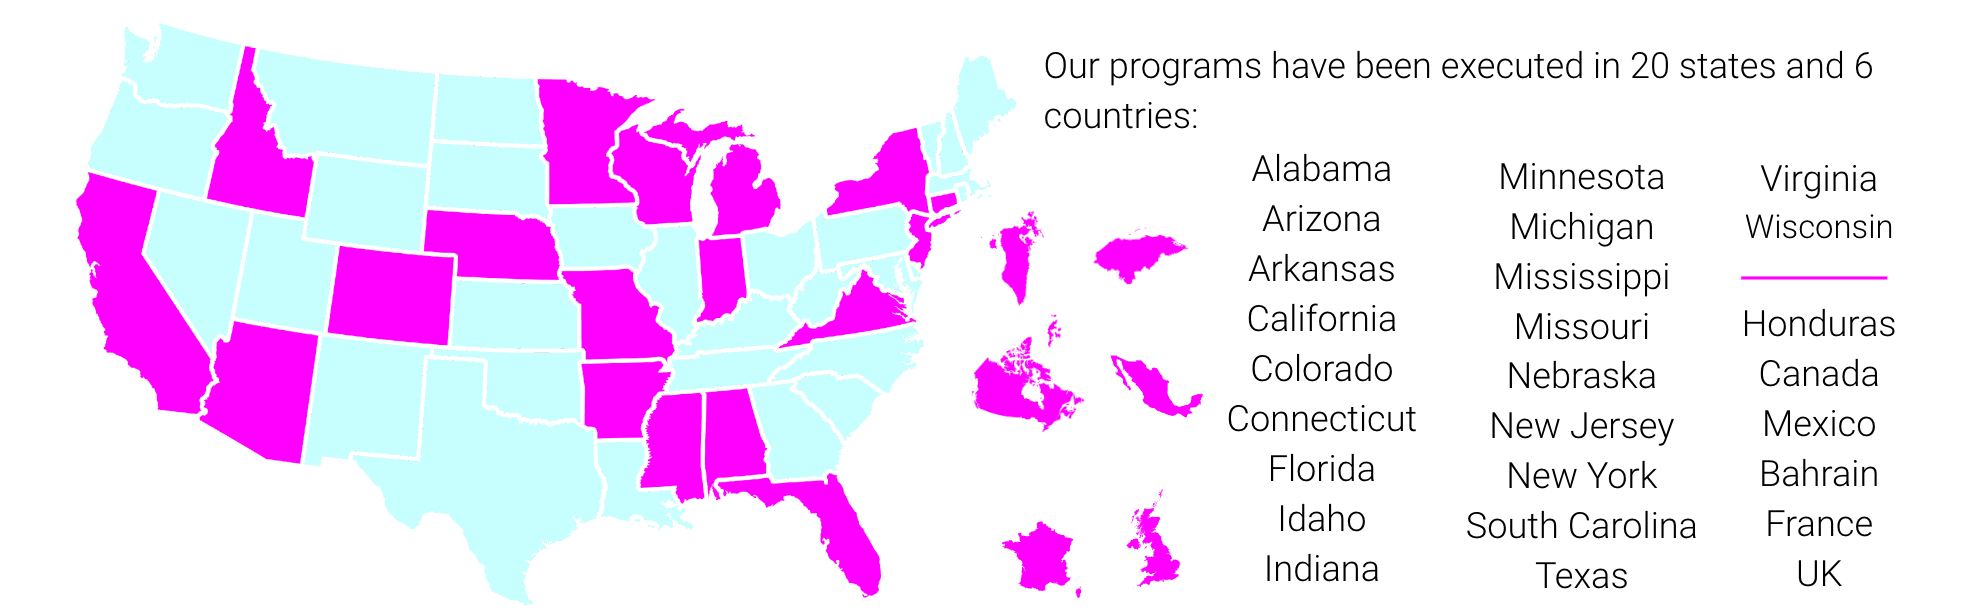 Our programs haven executed in 20 states and 6 countries